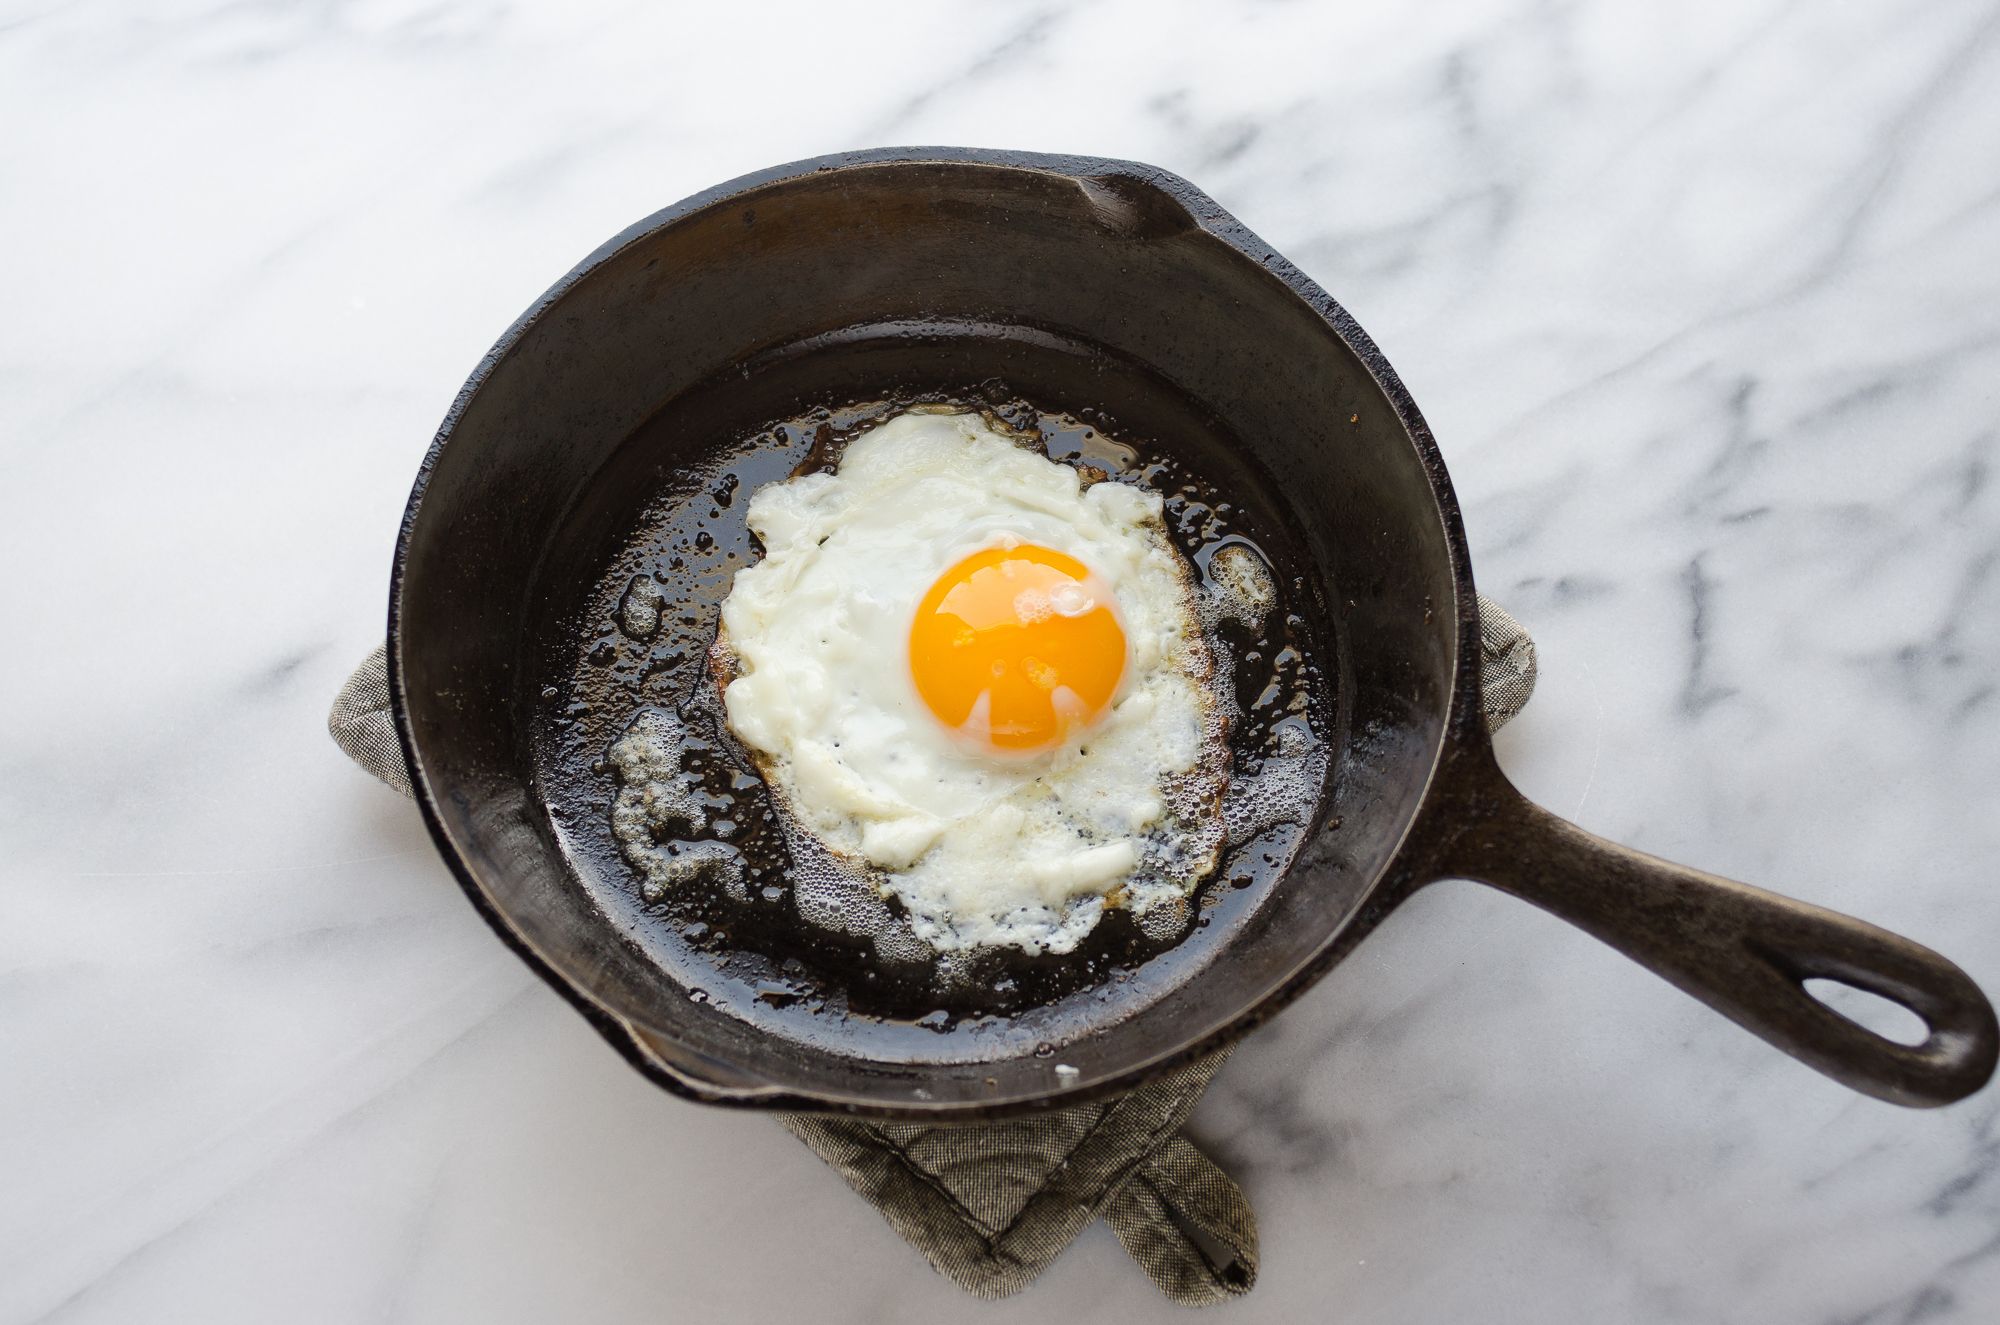 How to Season Cast Iron with Bacon Grease (8 Easy Steps)